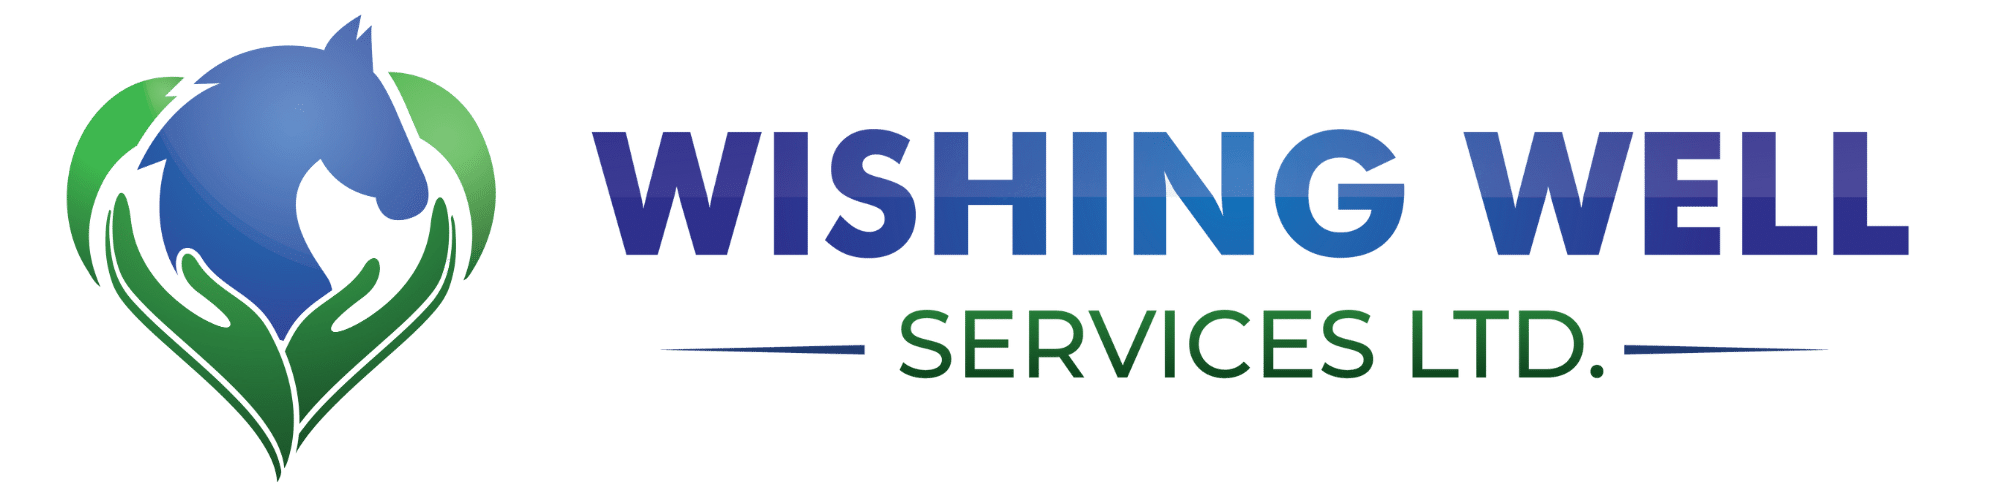 Wishing Well Services Ltd.